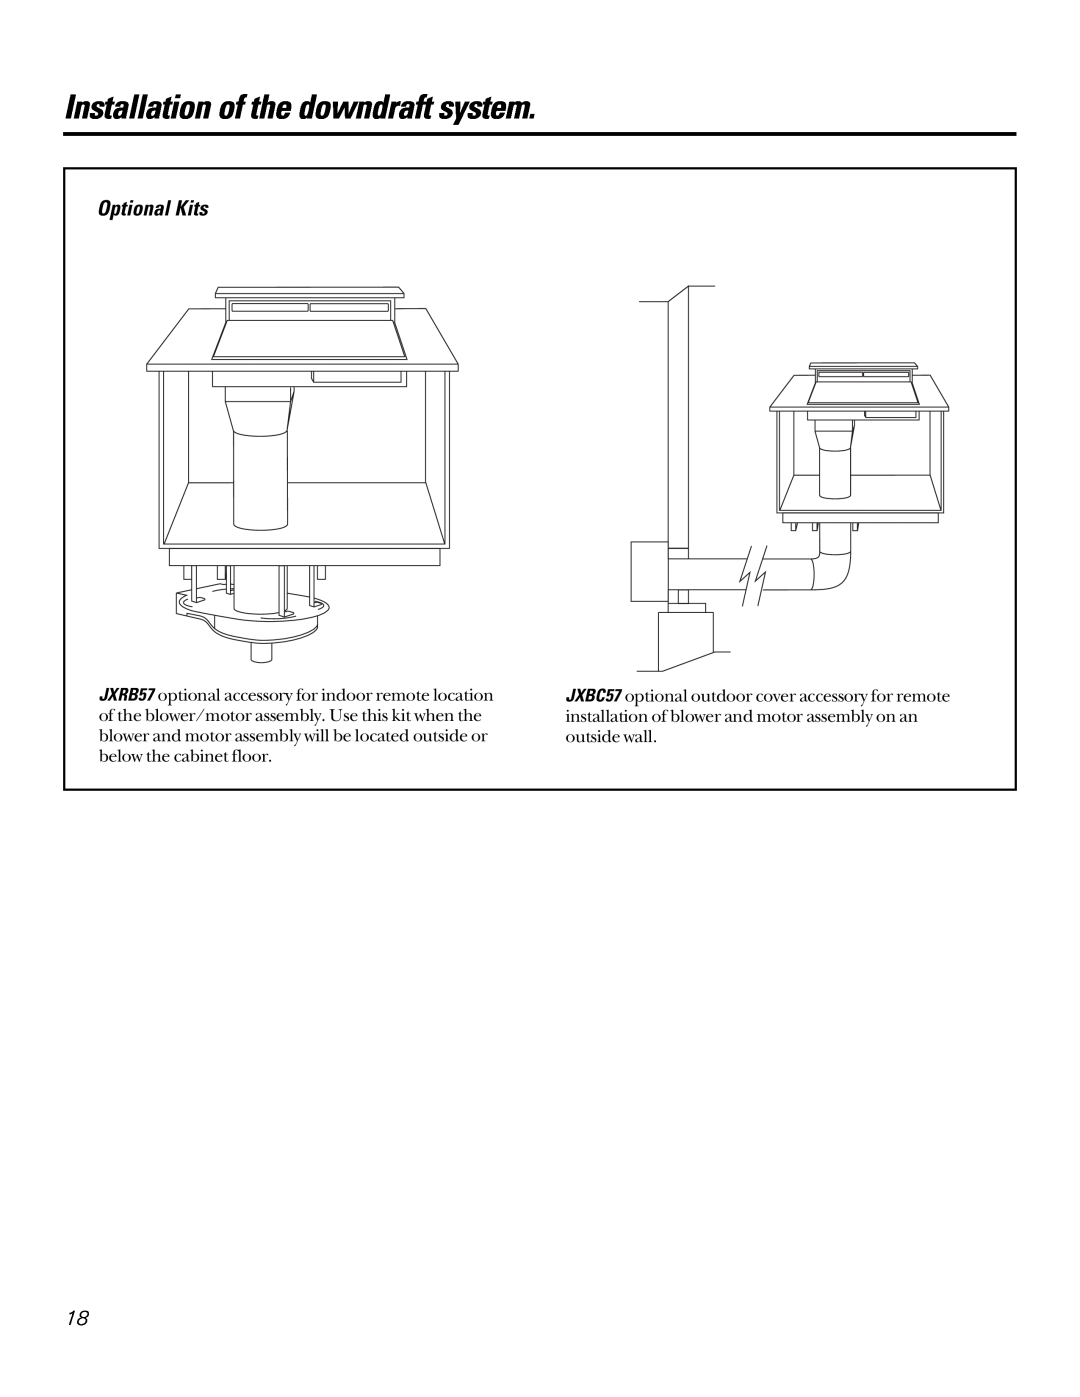 GE JGP656 installation instructions Optional Kits, Installation of the downdraft system 